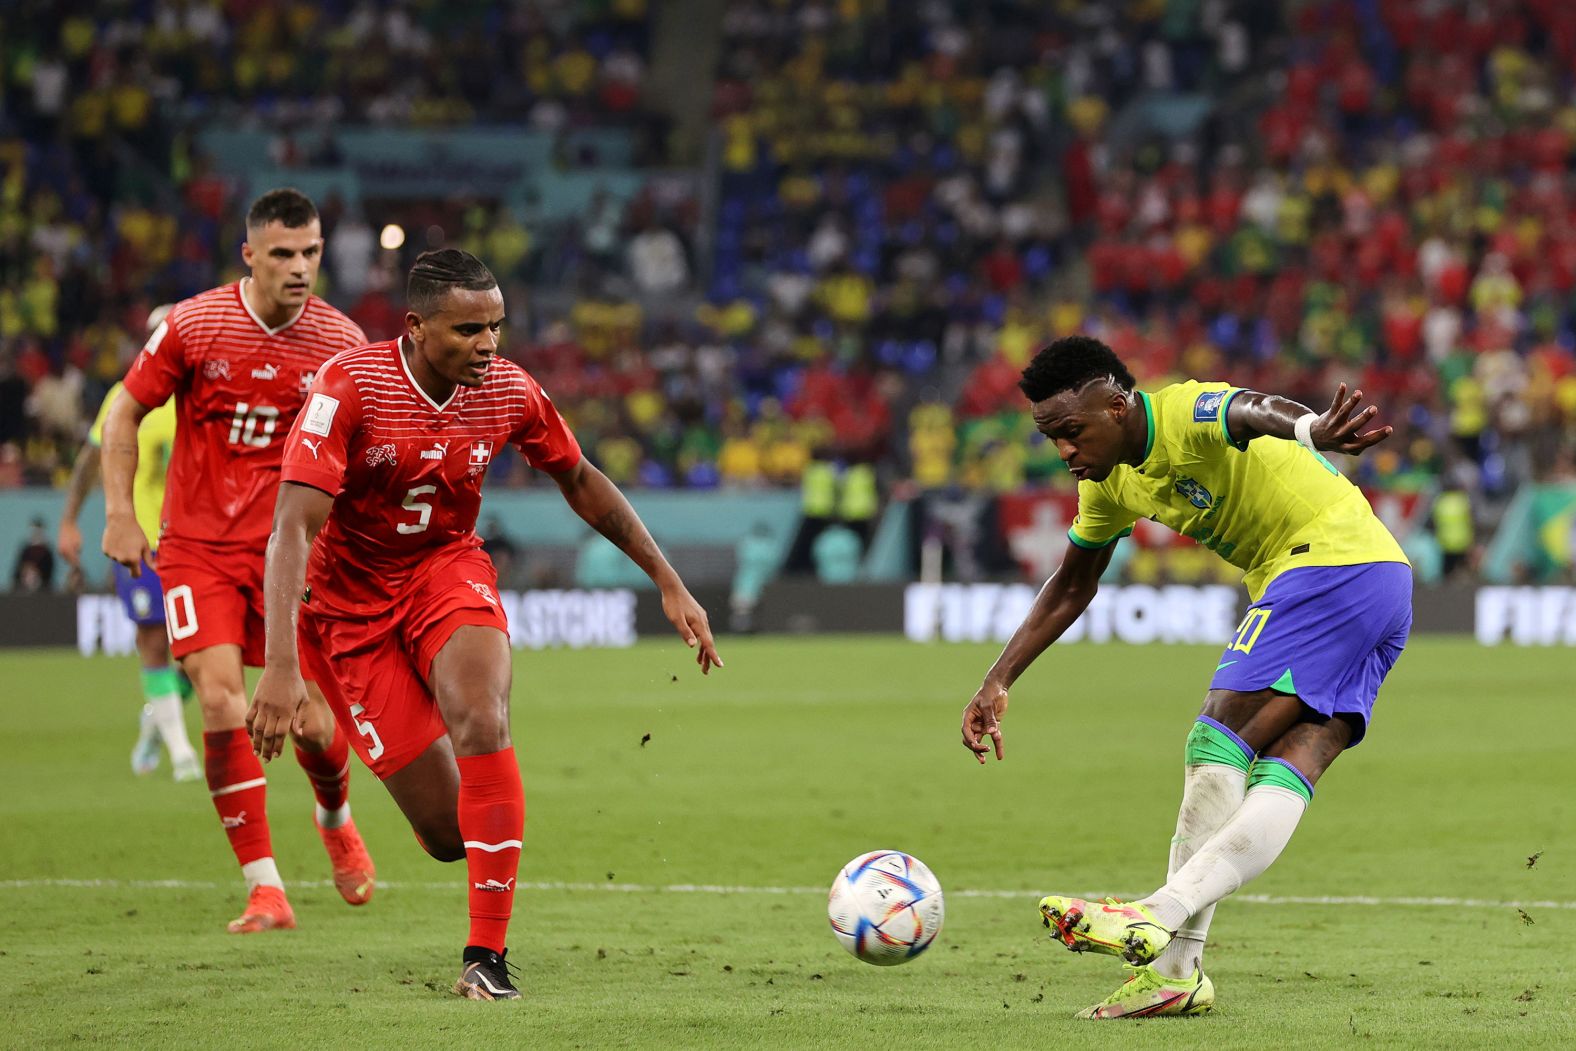 Brazil's Vinícius Júnior performs a rabona during his team's 1-0 victory over Switzerland on November 28. The Brazilians' win ensured that they would be advancing from their group.